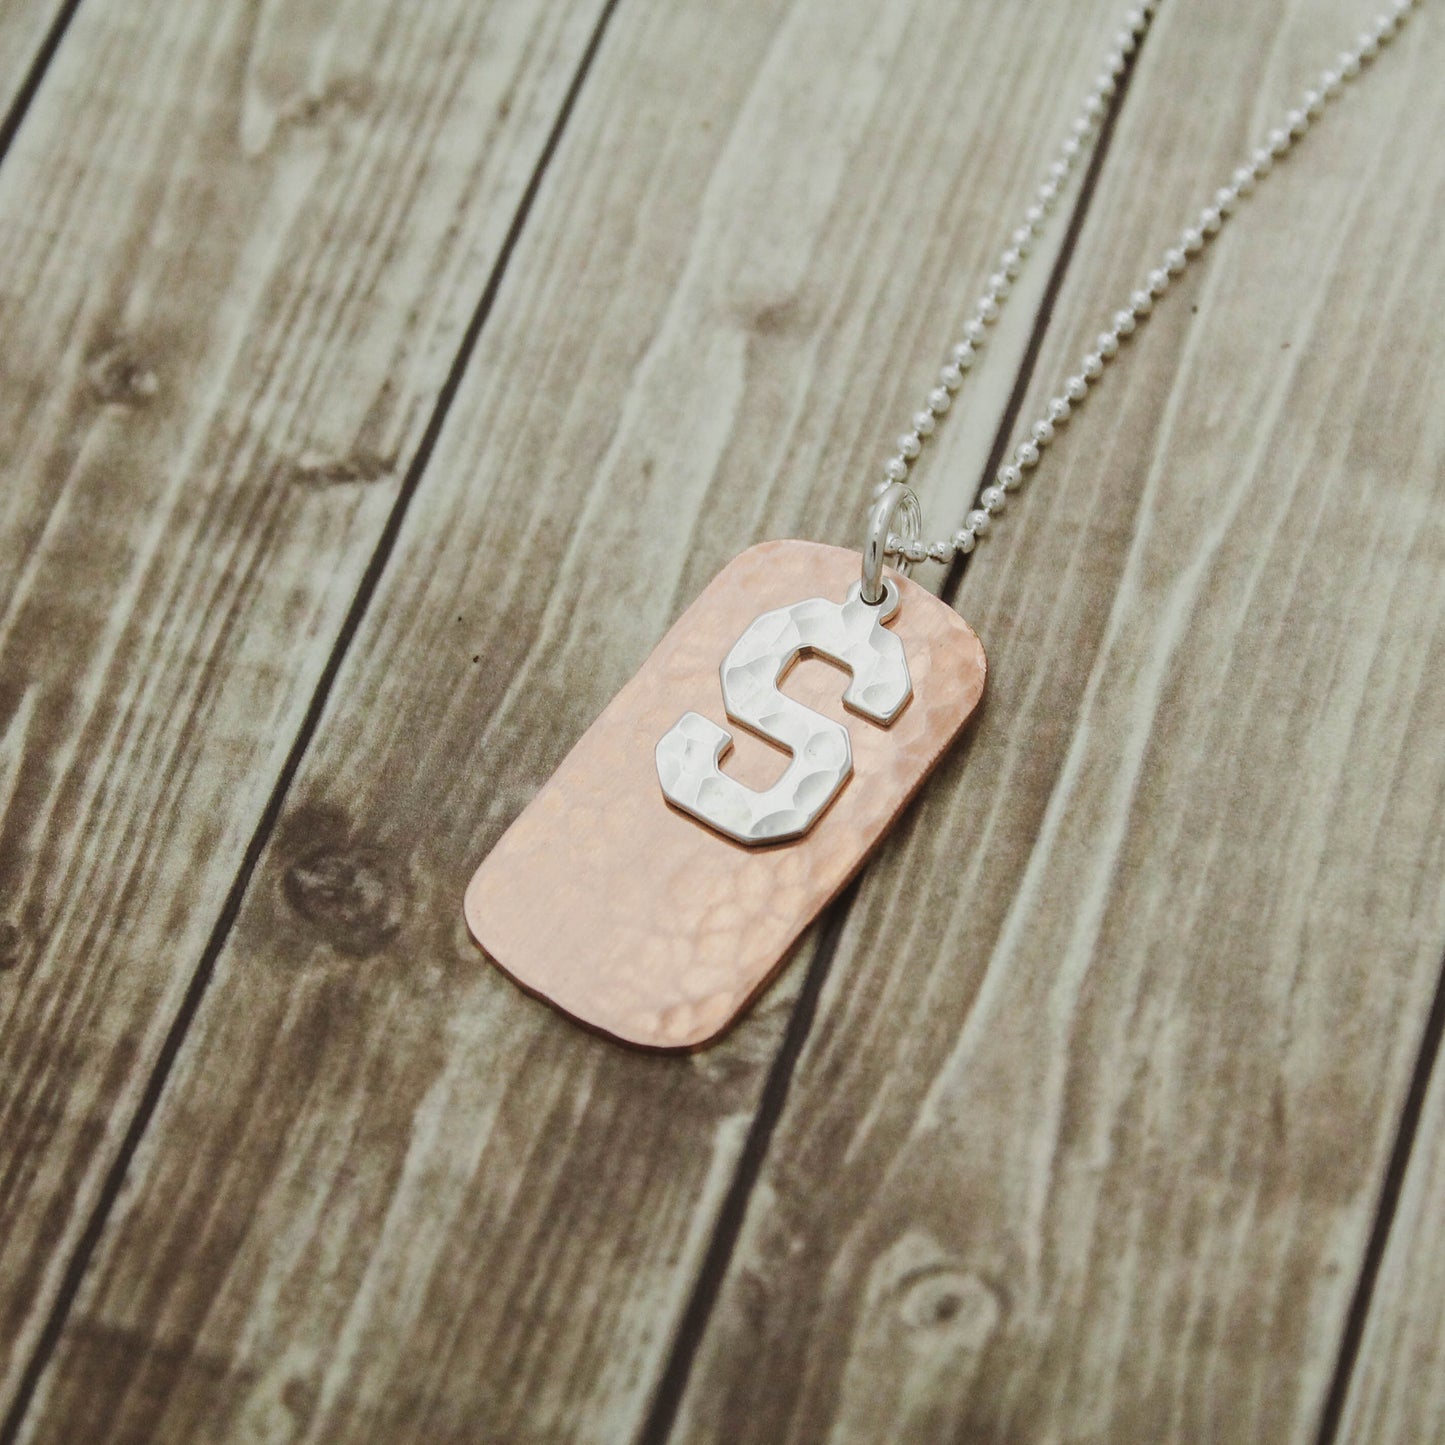 Boys Dog Tag Necklace, Boys Copper Initial Dog Tag Jewelry Gift, Copper Dog Tag Necklace for Boys, Personalized Simple Masculine Necklace